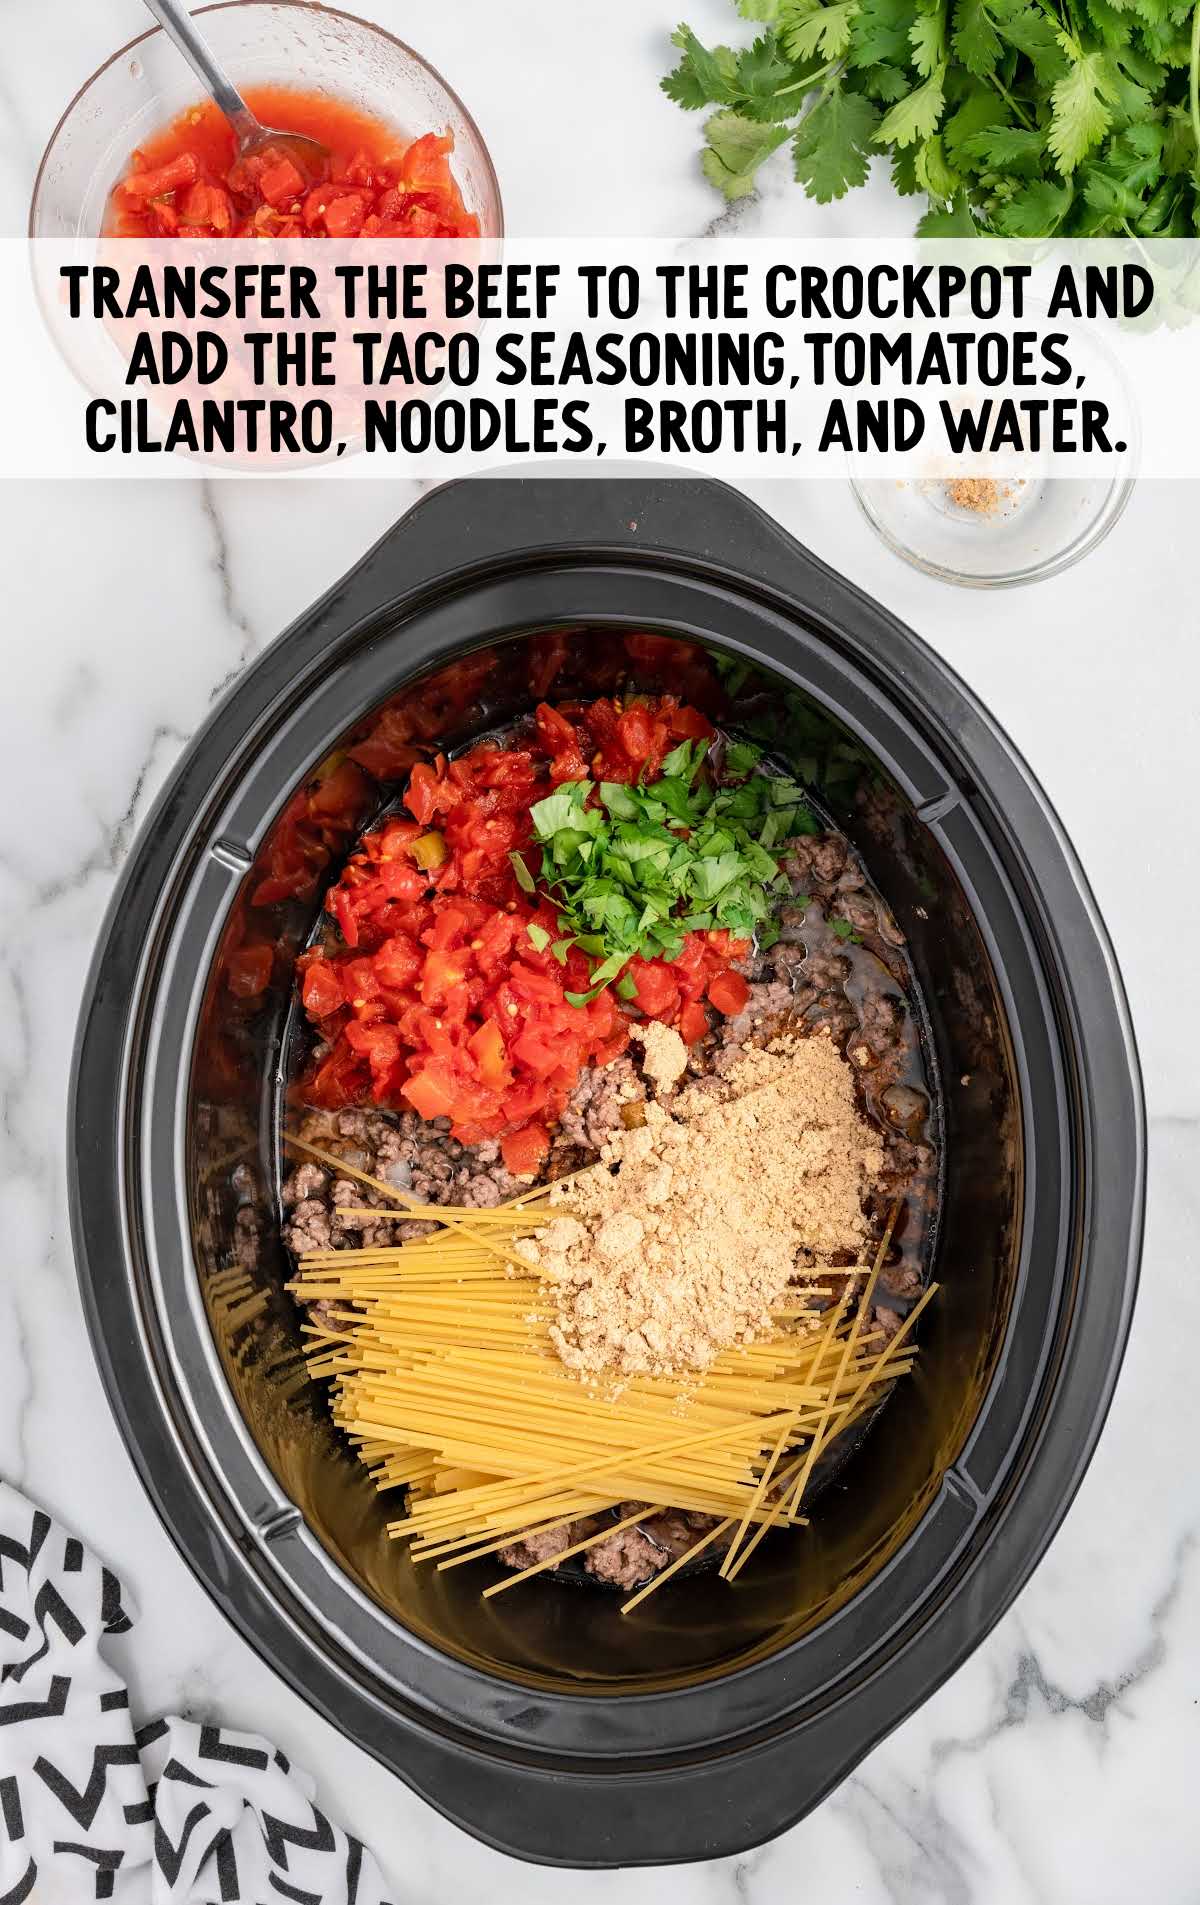 ground beef mixture, taco seasoning, Rotel tomatoes, cilantro, spaghetti noodles, beef broth, and water added to a crockpot